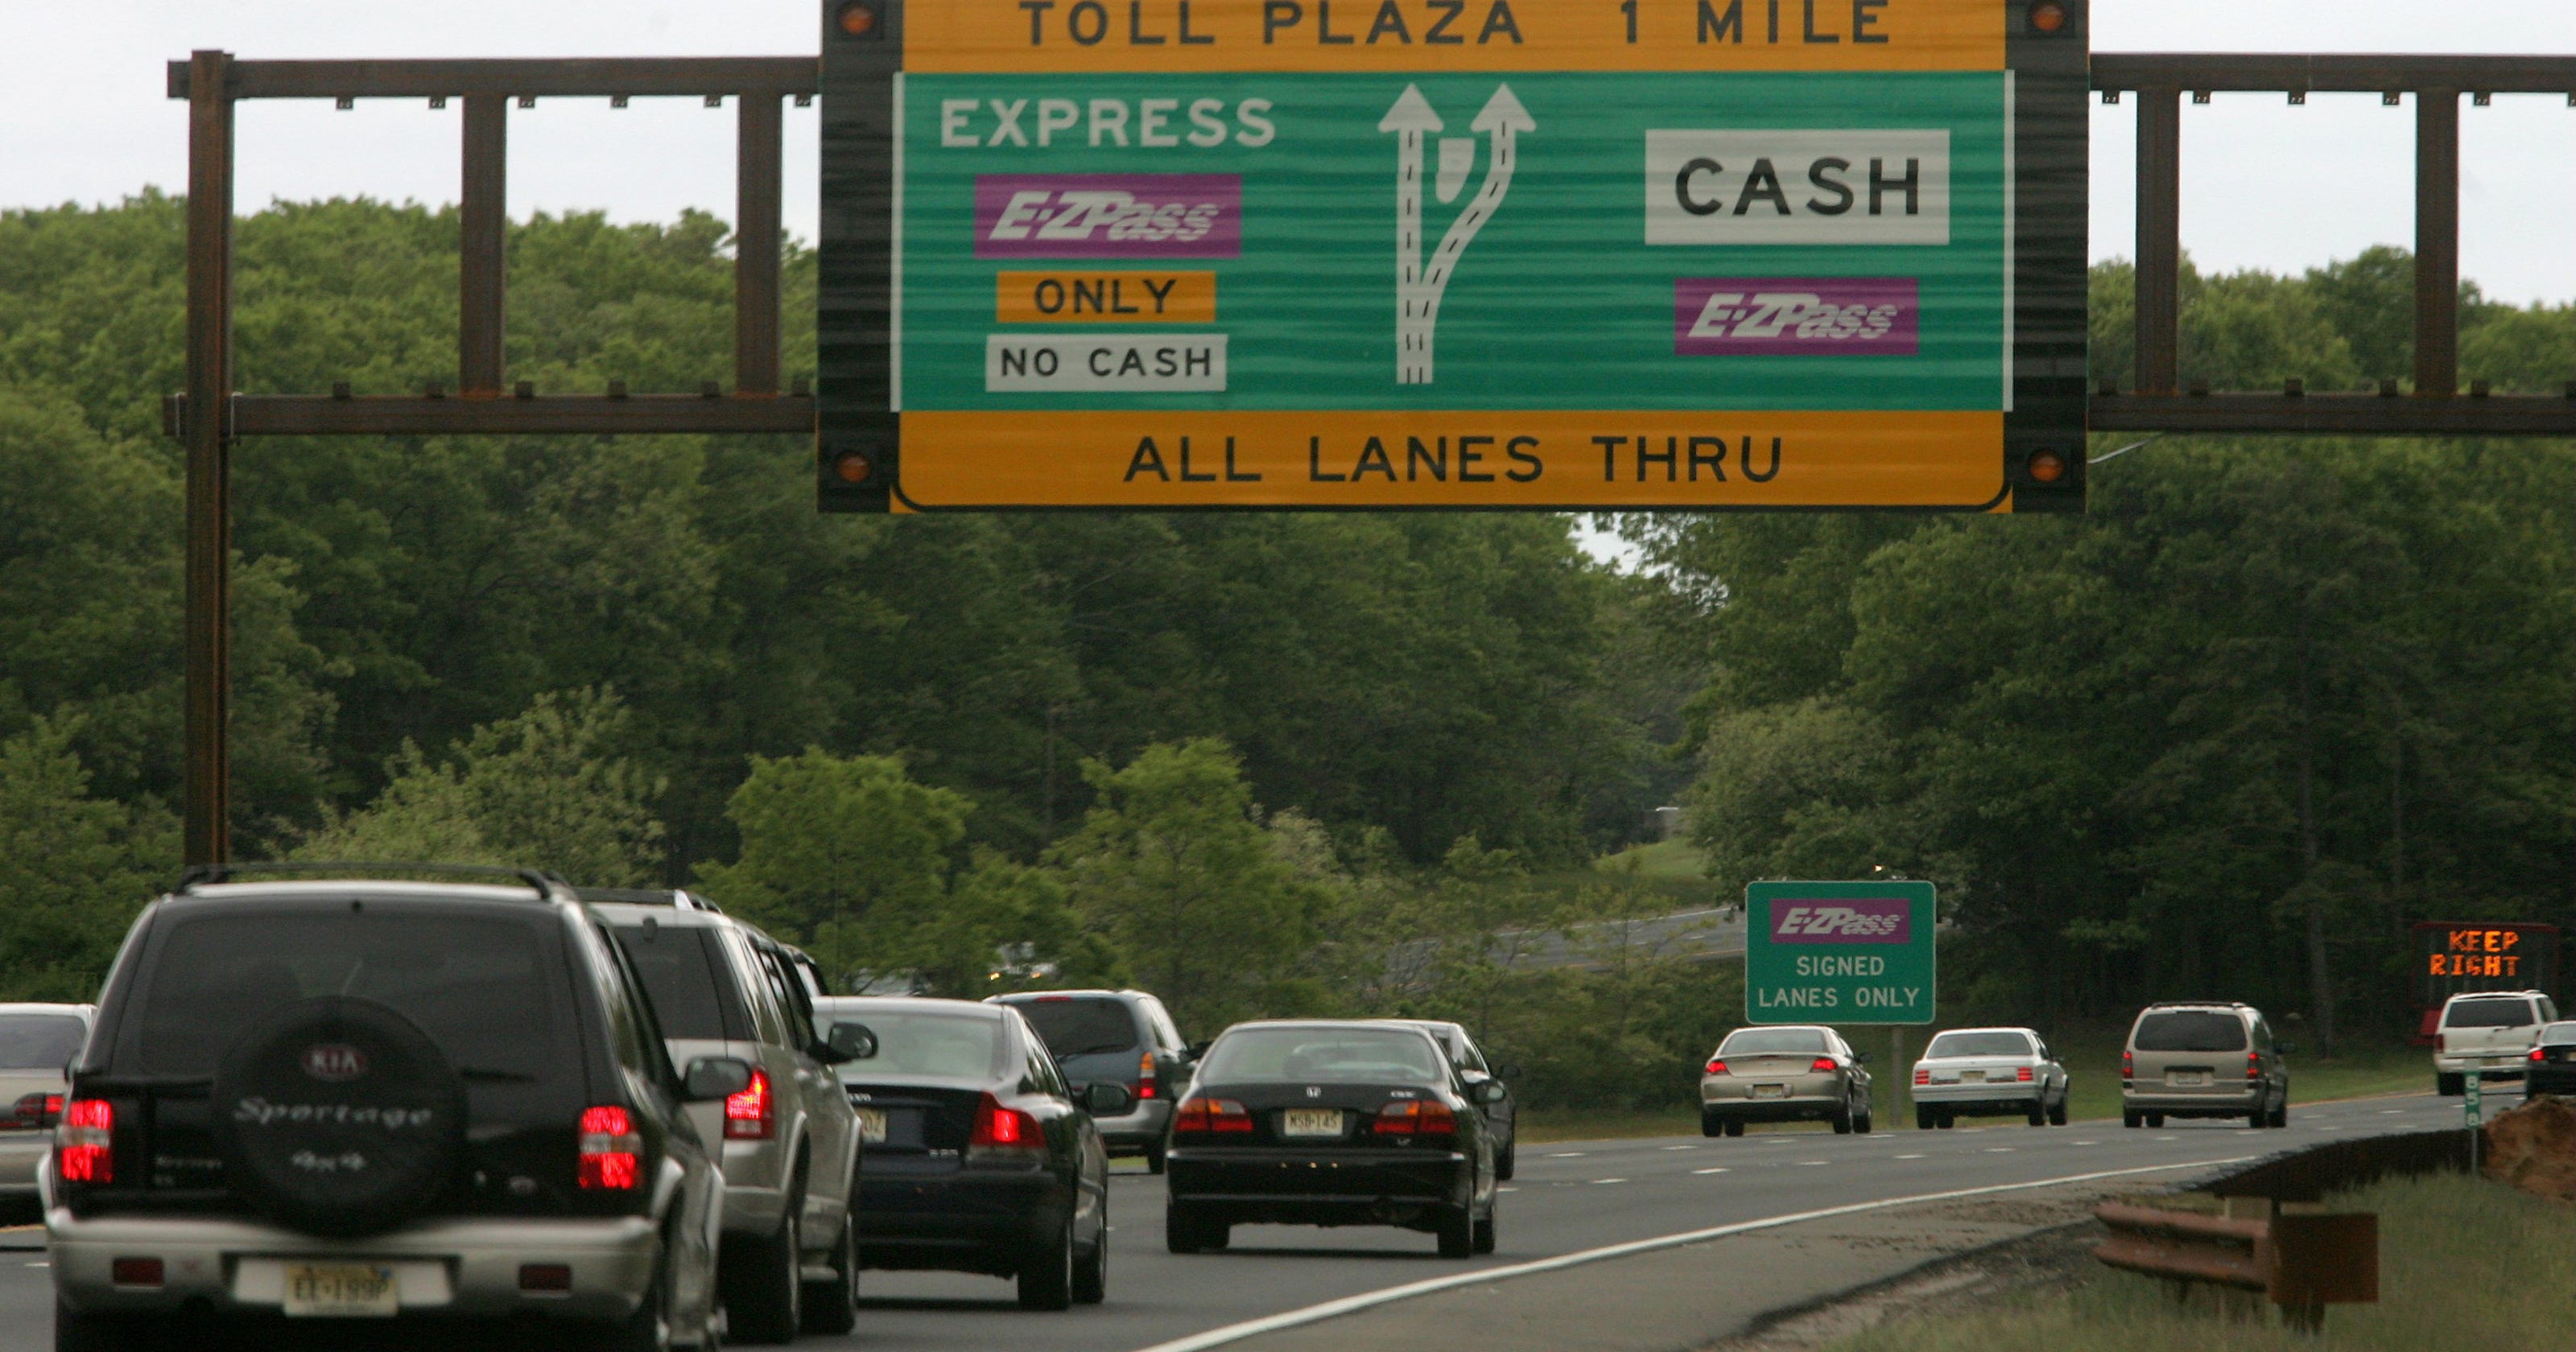 E Zpass Will Become More Vital In New York Here Are Helpful